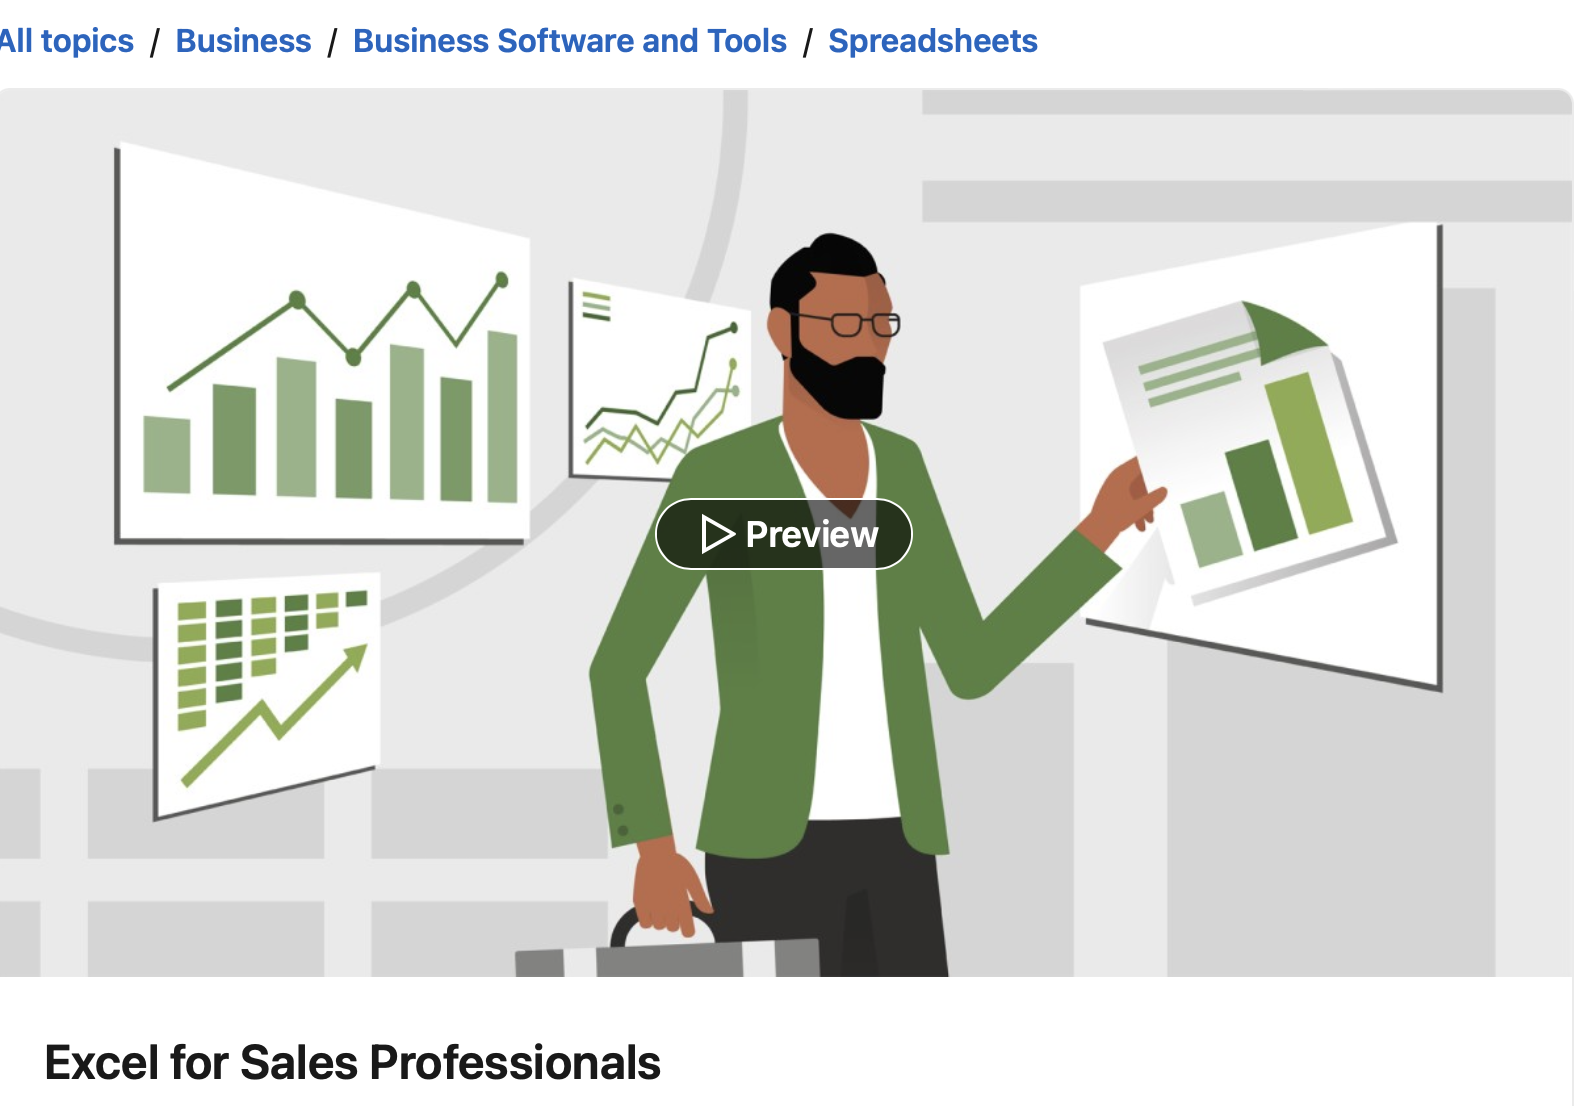 Excel for Sales Professionals